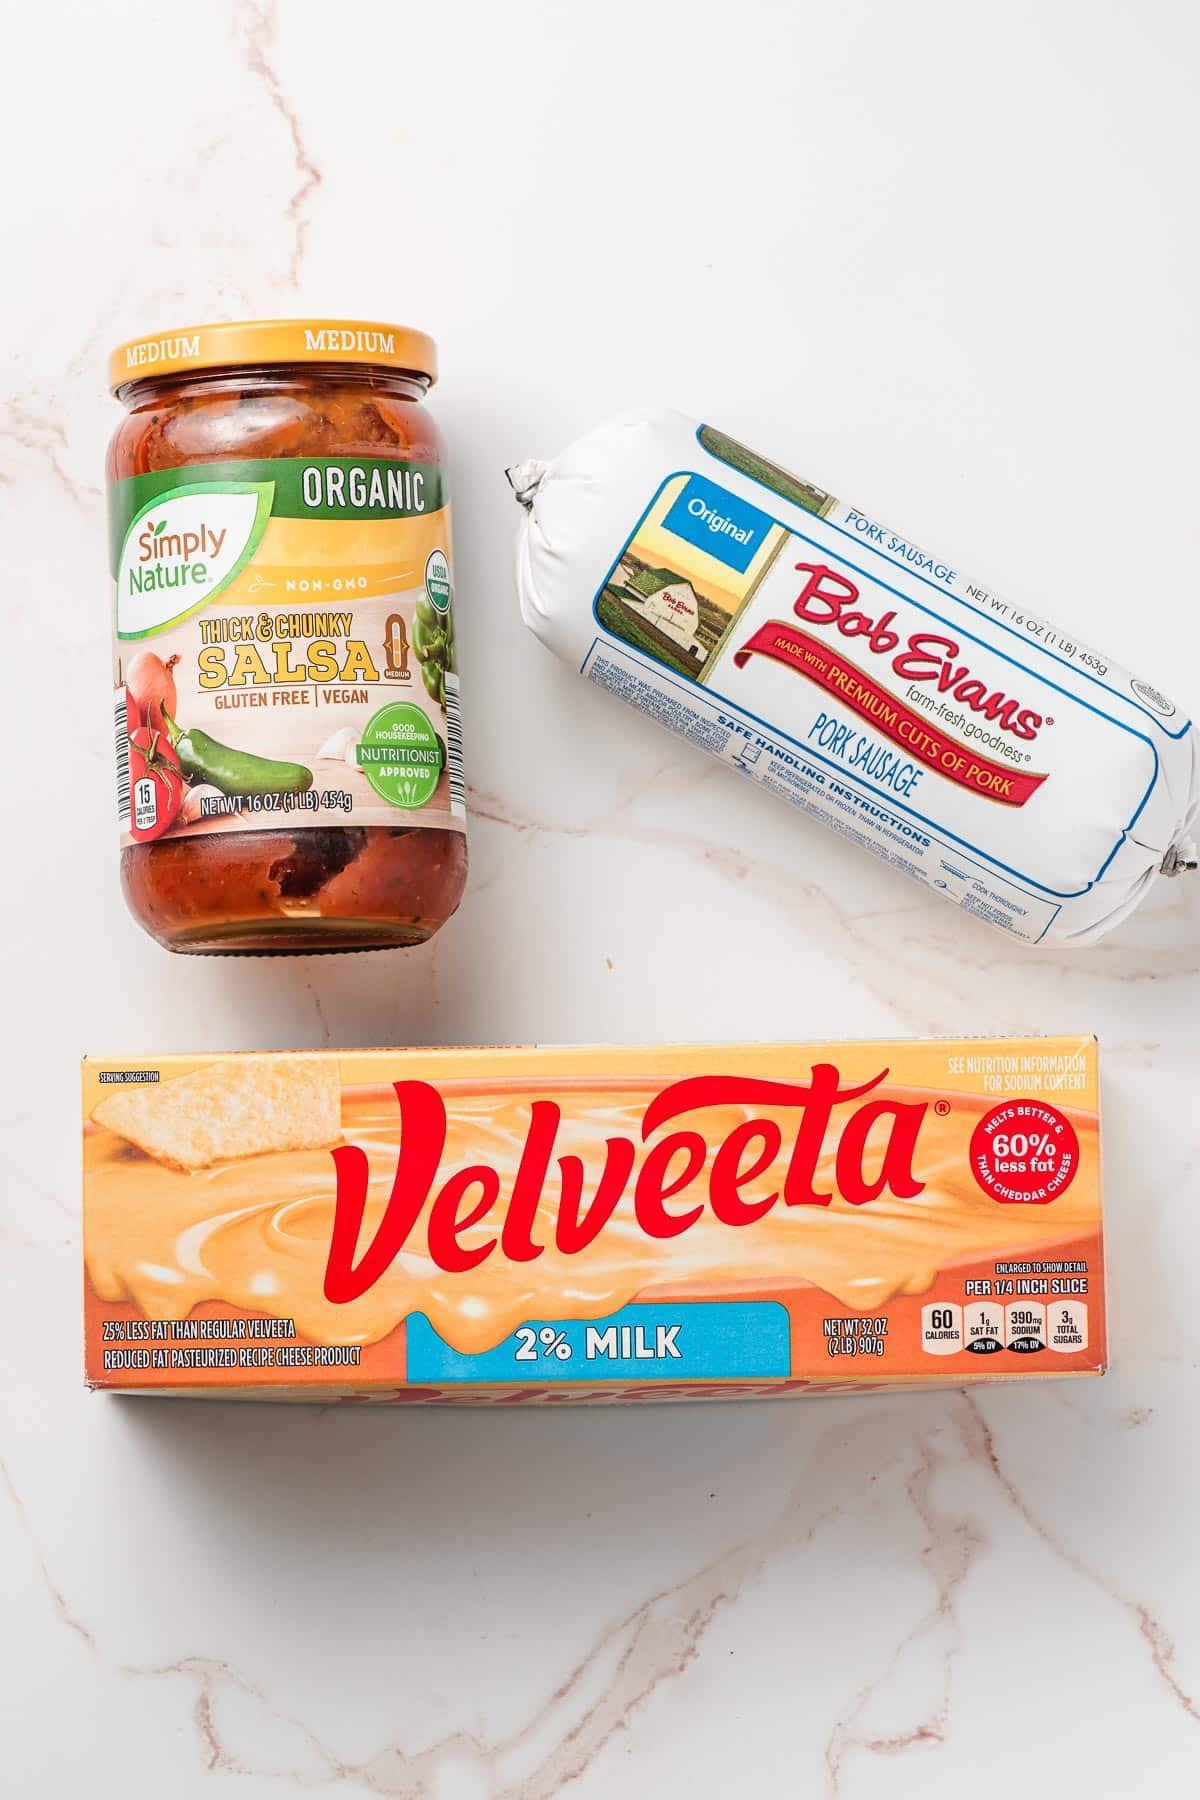 Velveeta cheese, a jar of salsa, and a tube of breakfast sausage on a white background.